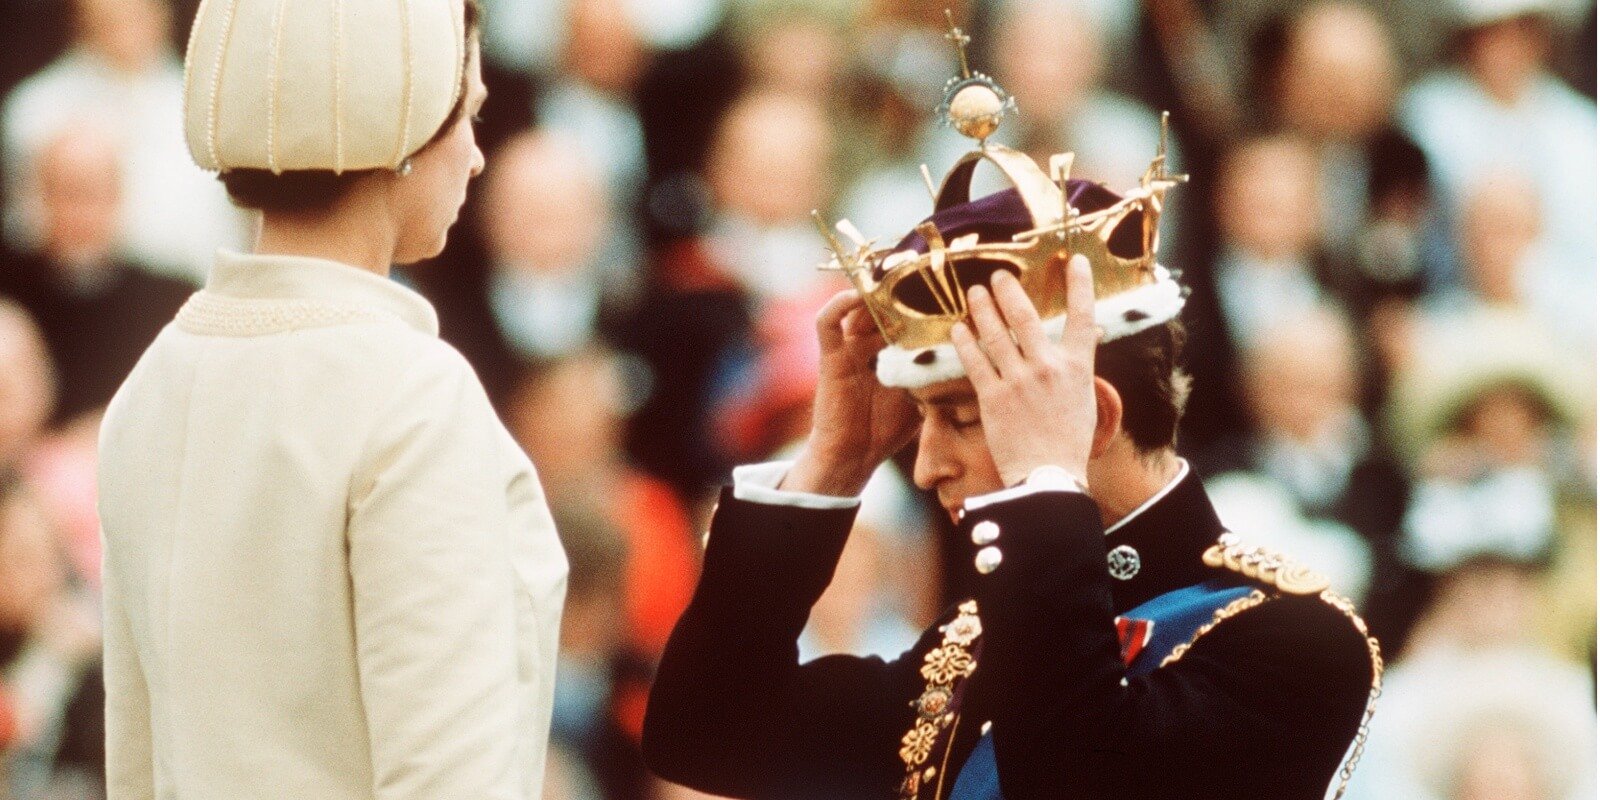 King Charles wore a coronet with a hidden object atop it during his 1969 investiture ceremony as Prince of Wales.